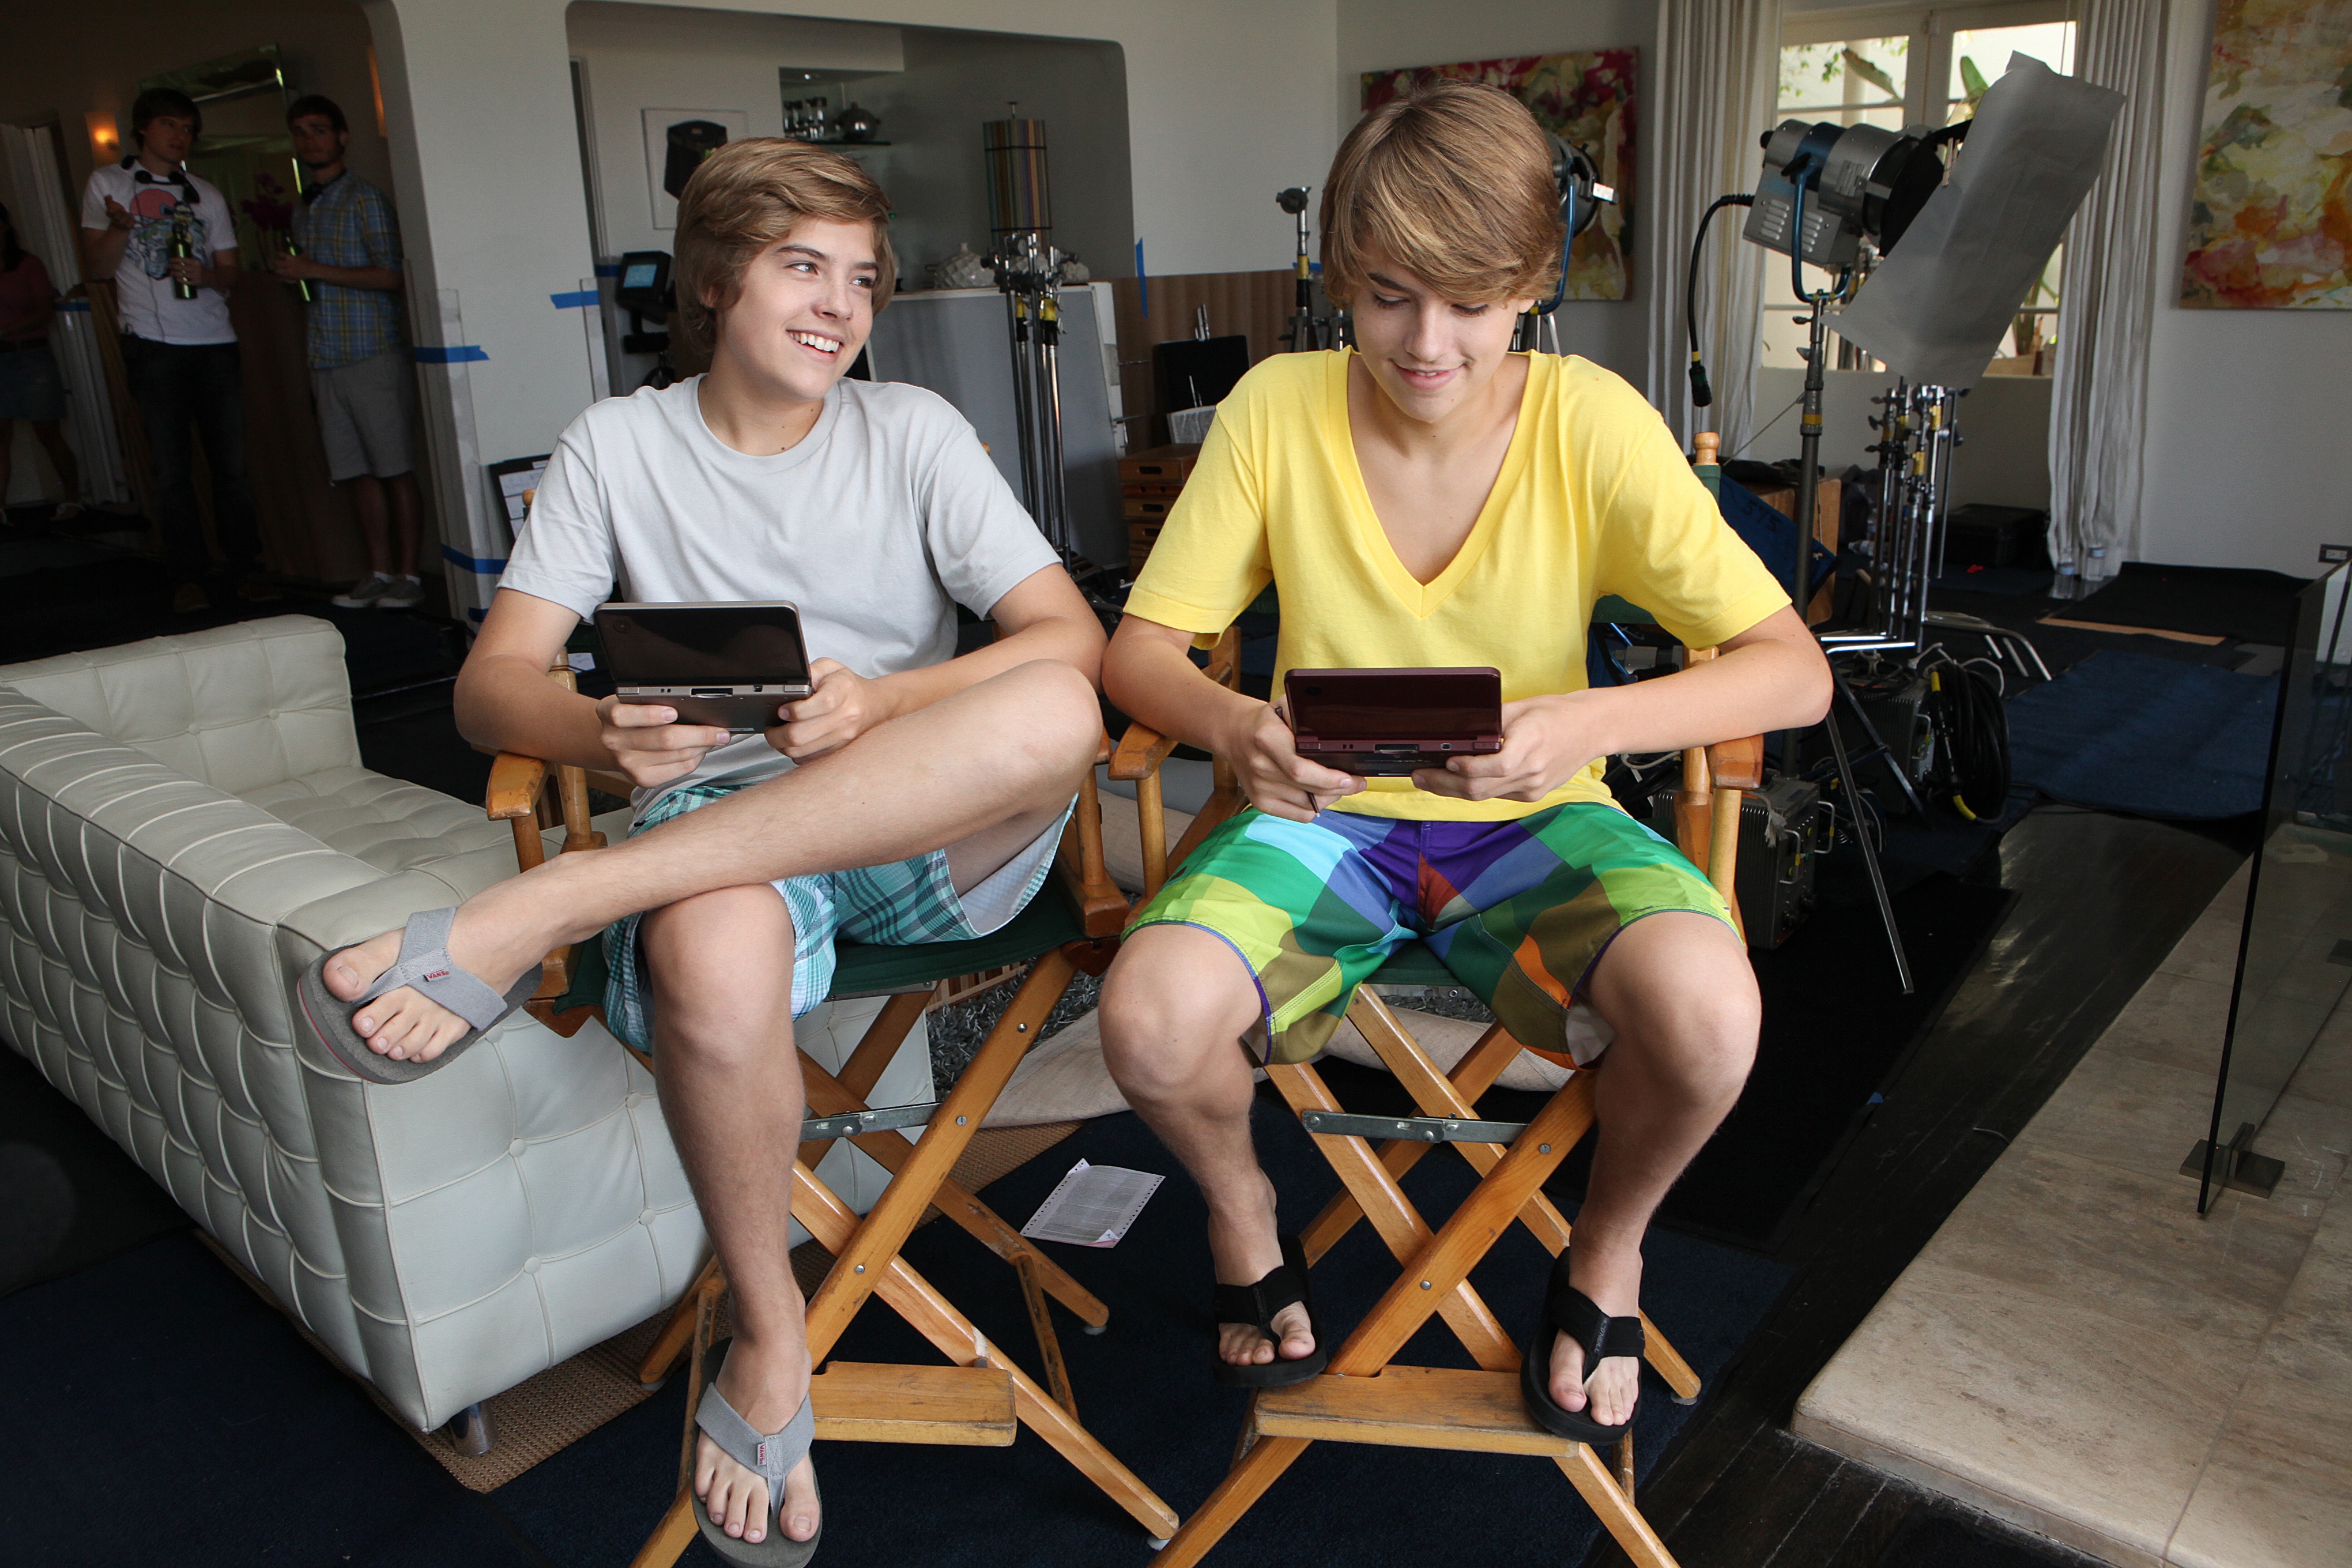 Dylan Sprouse. 